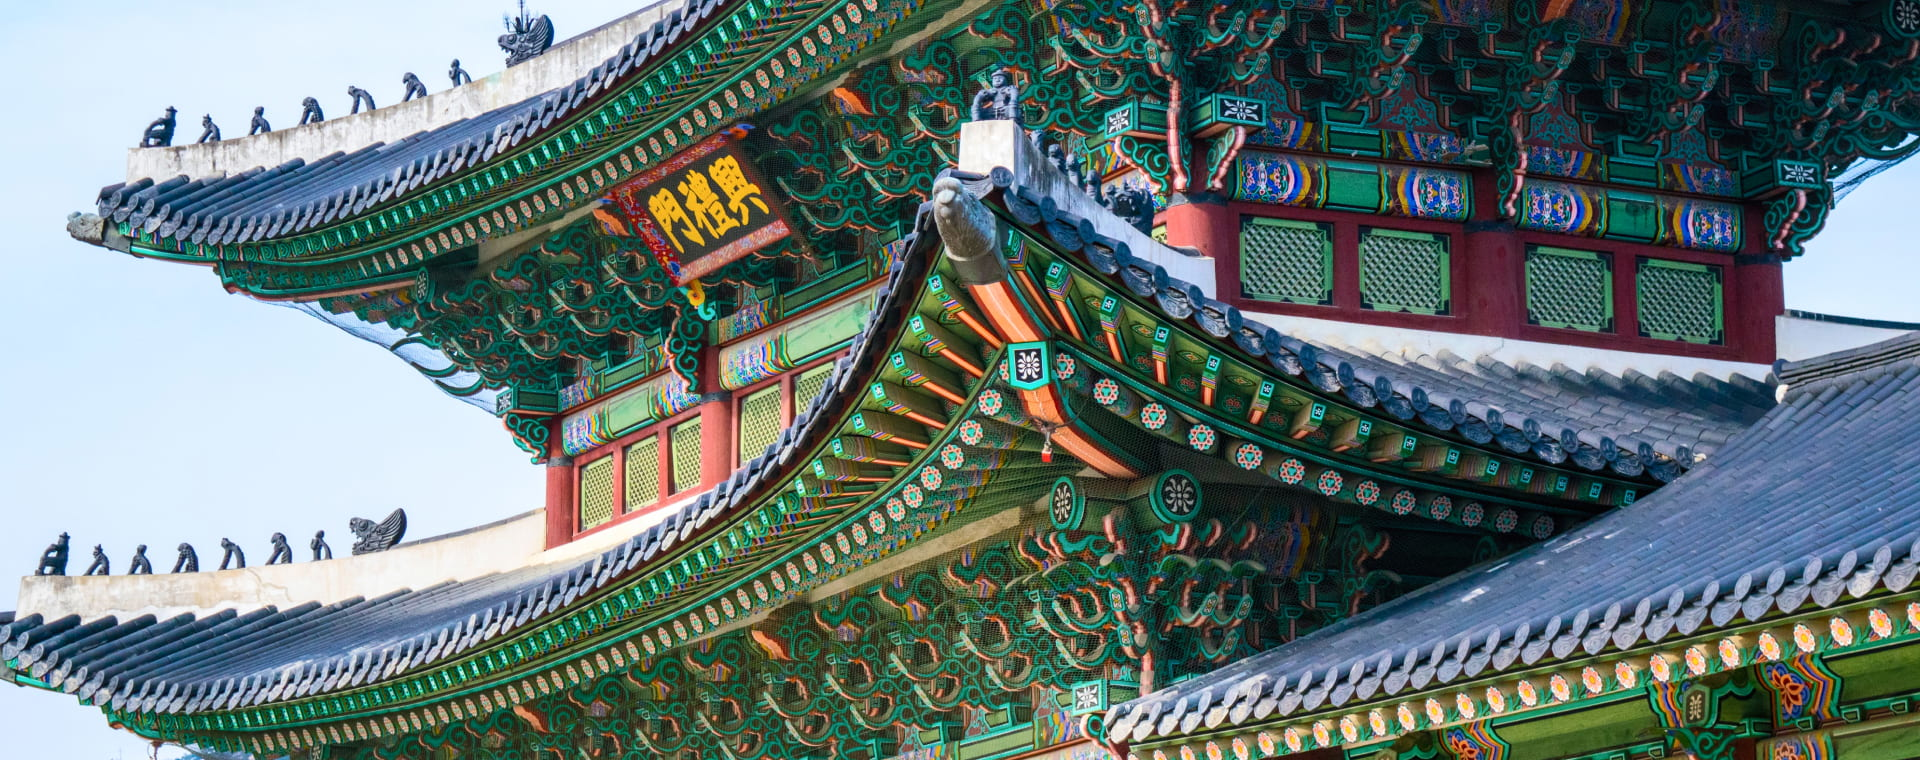 A close up of an asian style building.